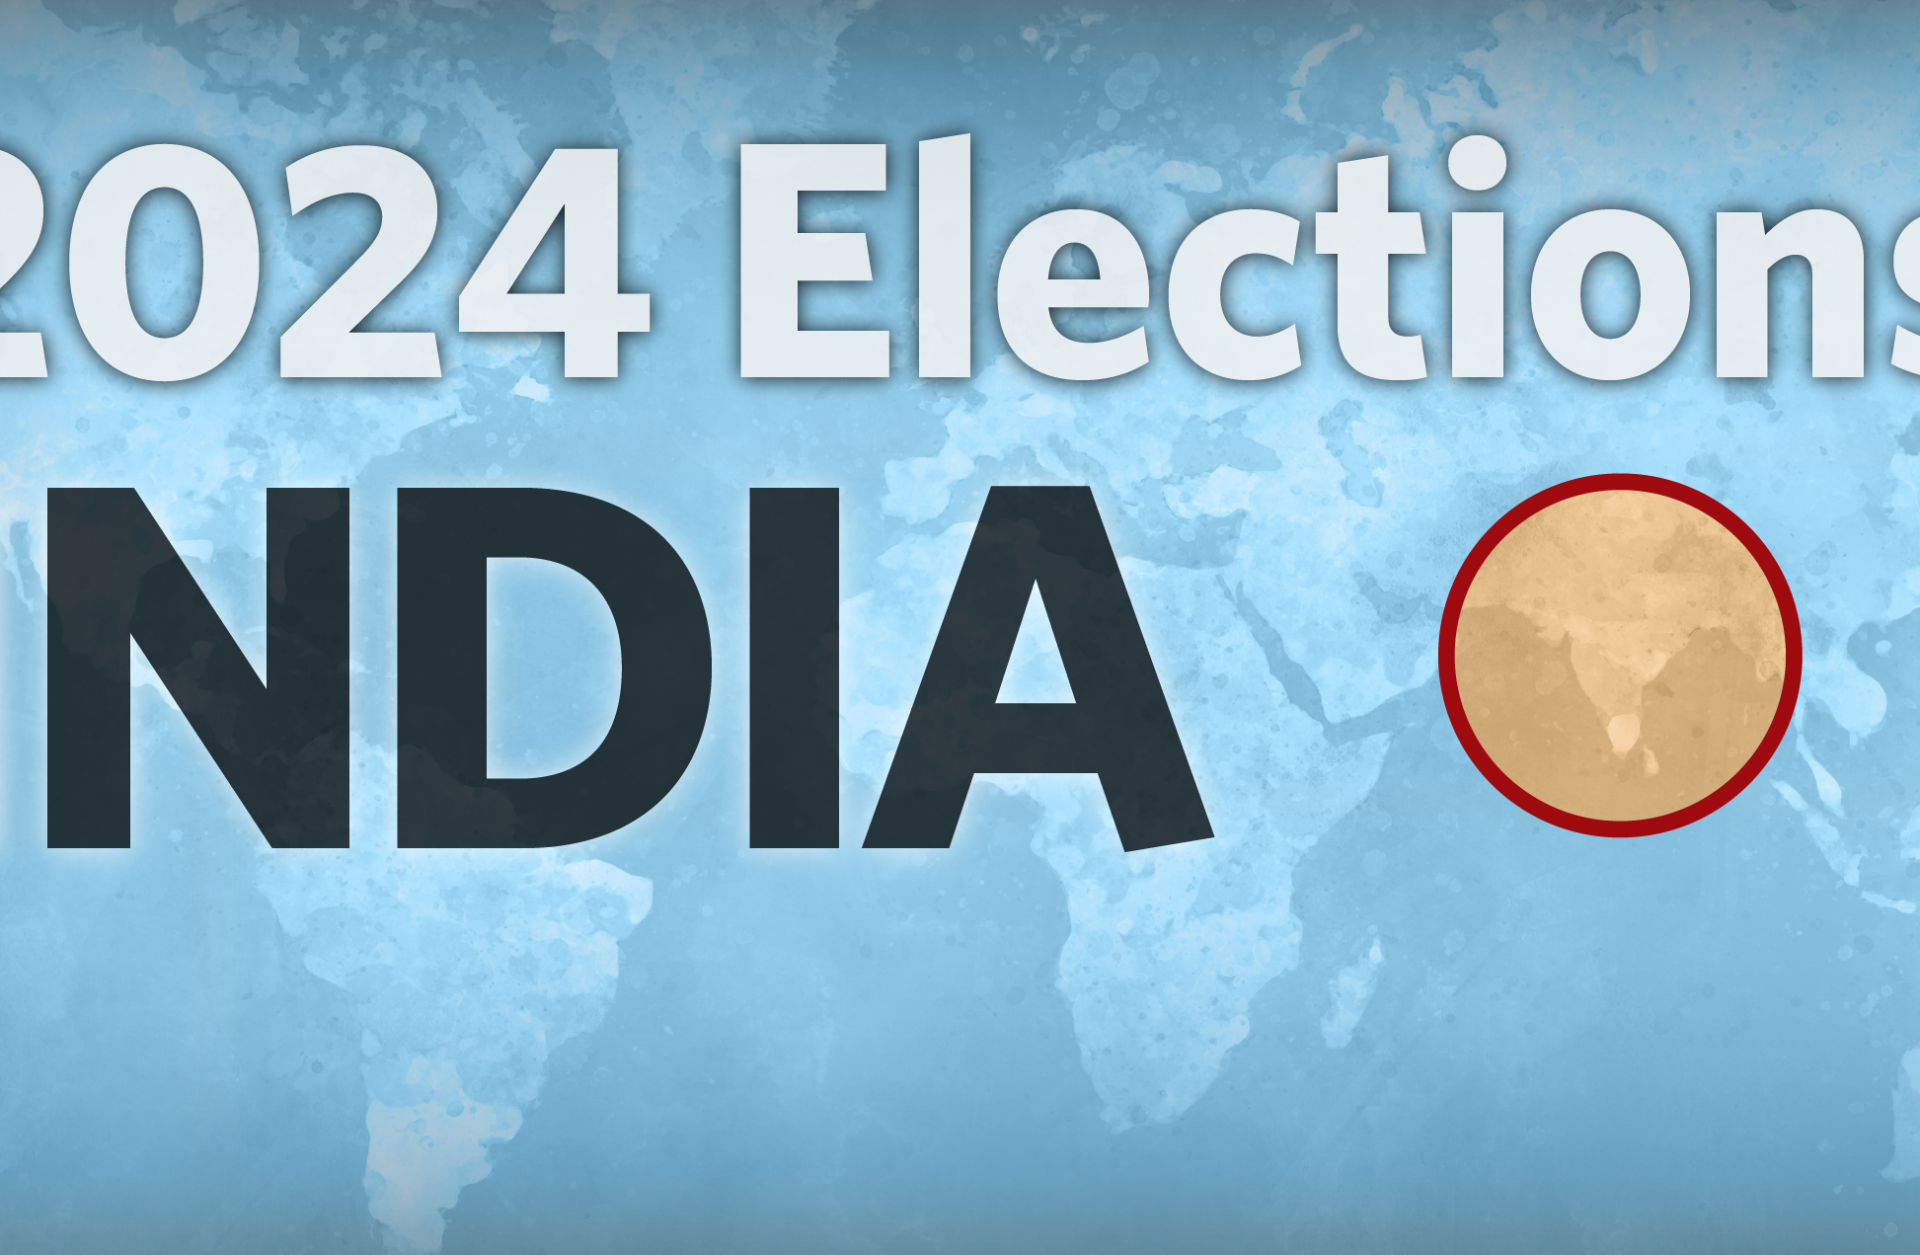 2024 Elections: India